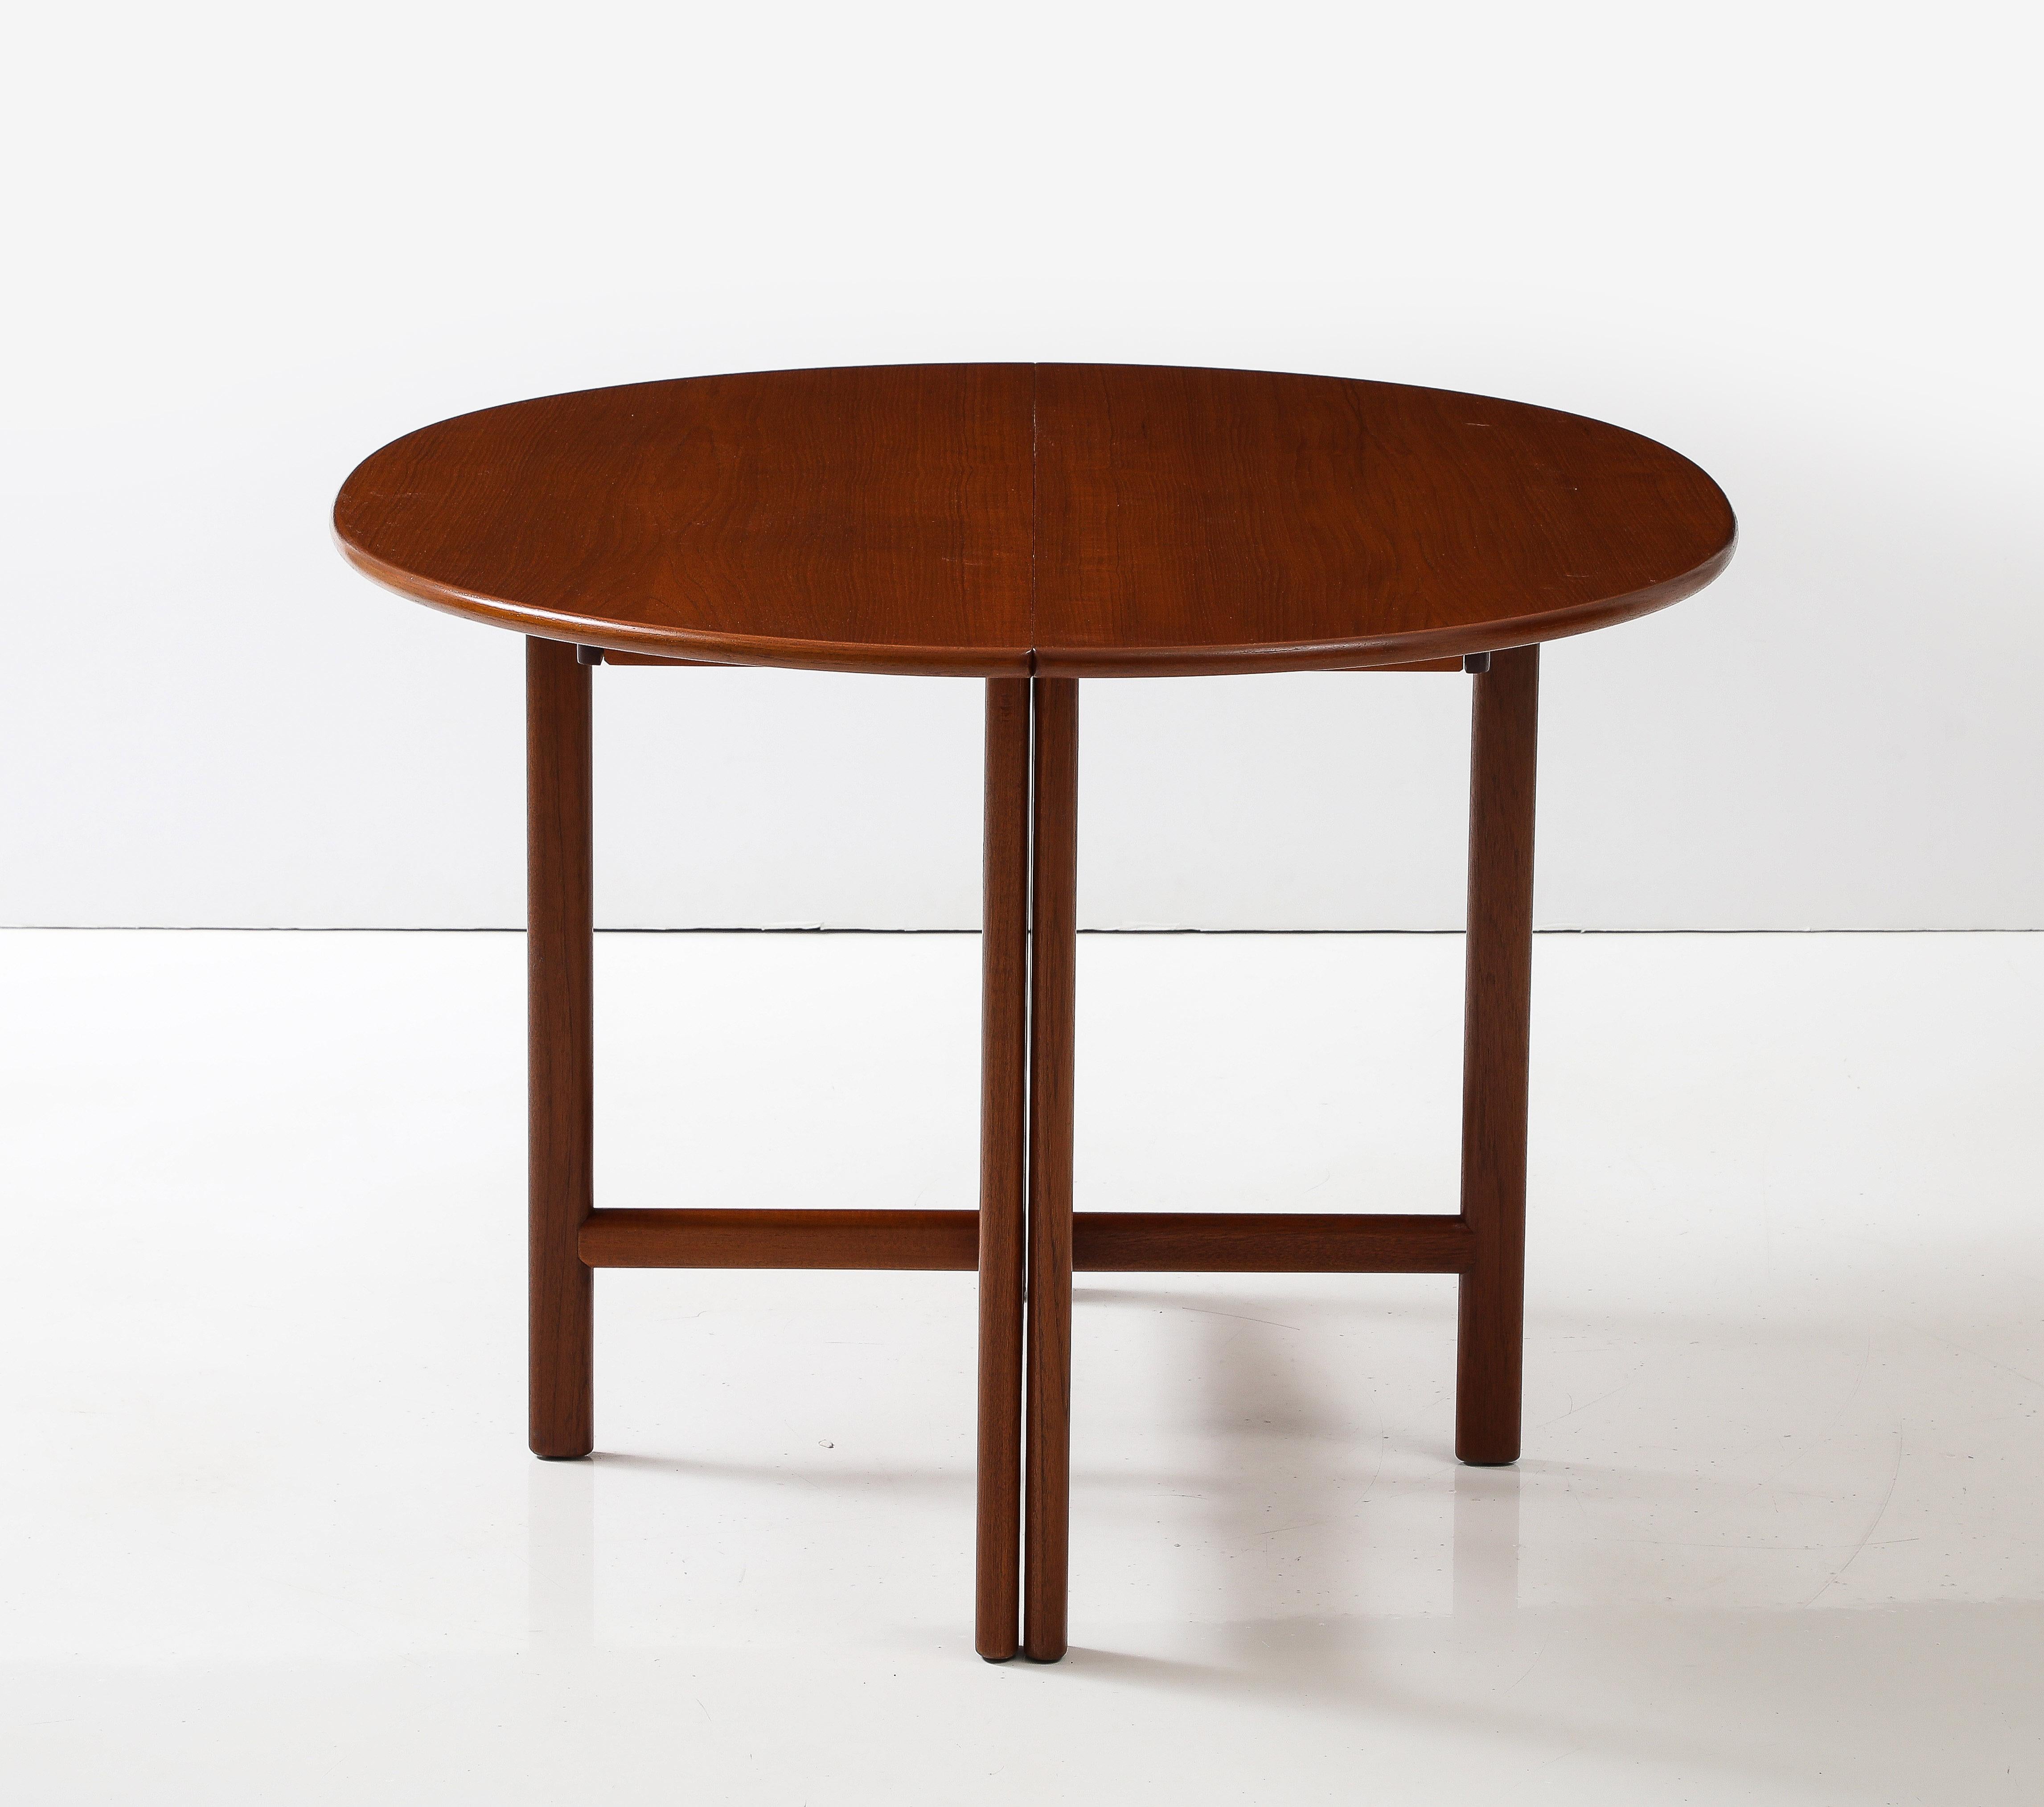 Mid-20th Century 1960's Teak Dining Table Designed By Karl-Erik Ekselius For JOC With 3 Leaves For Sale